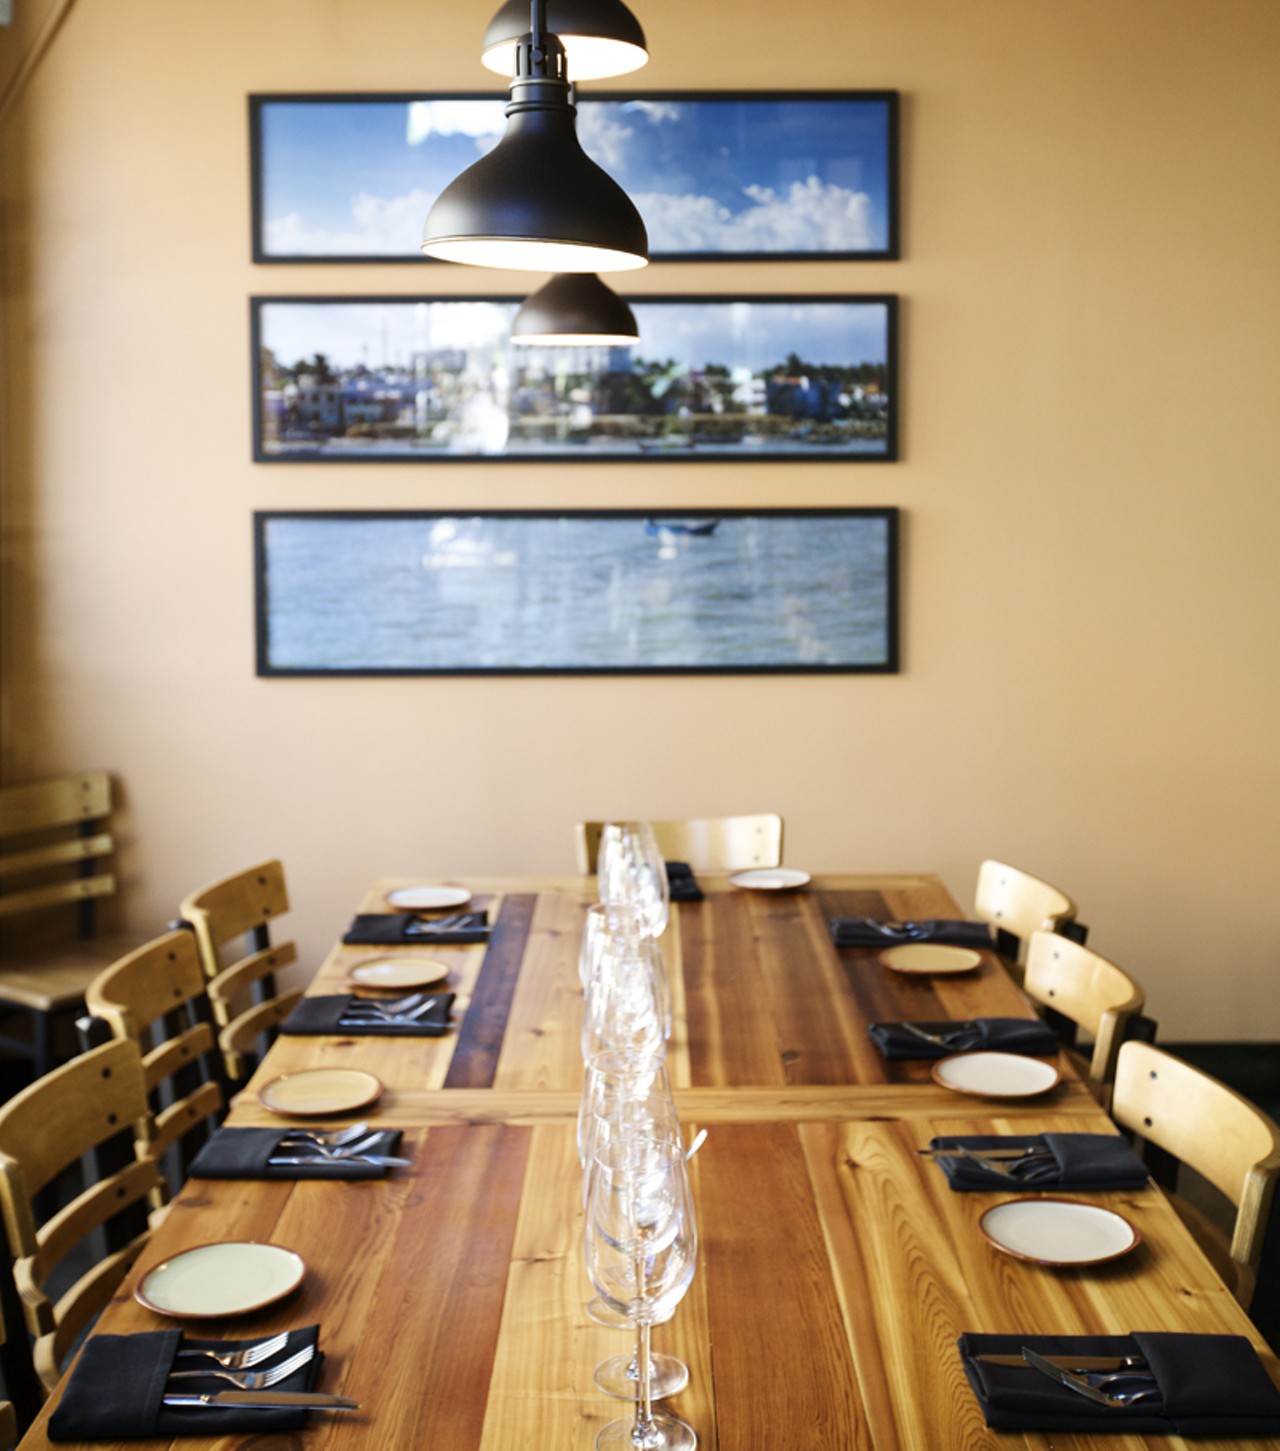 Simple and rustic, the decor matches the style of the food.